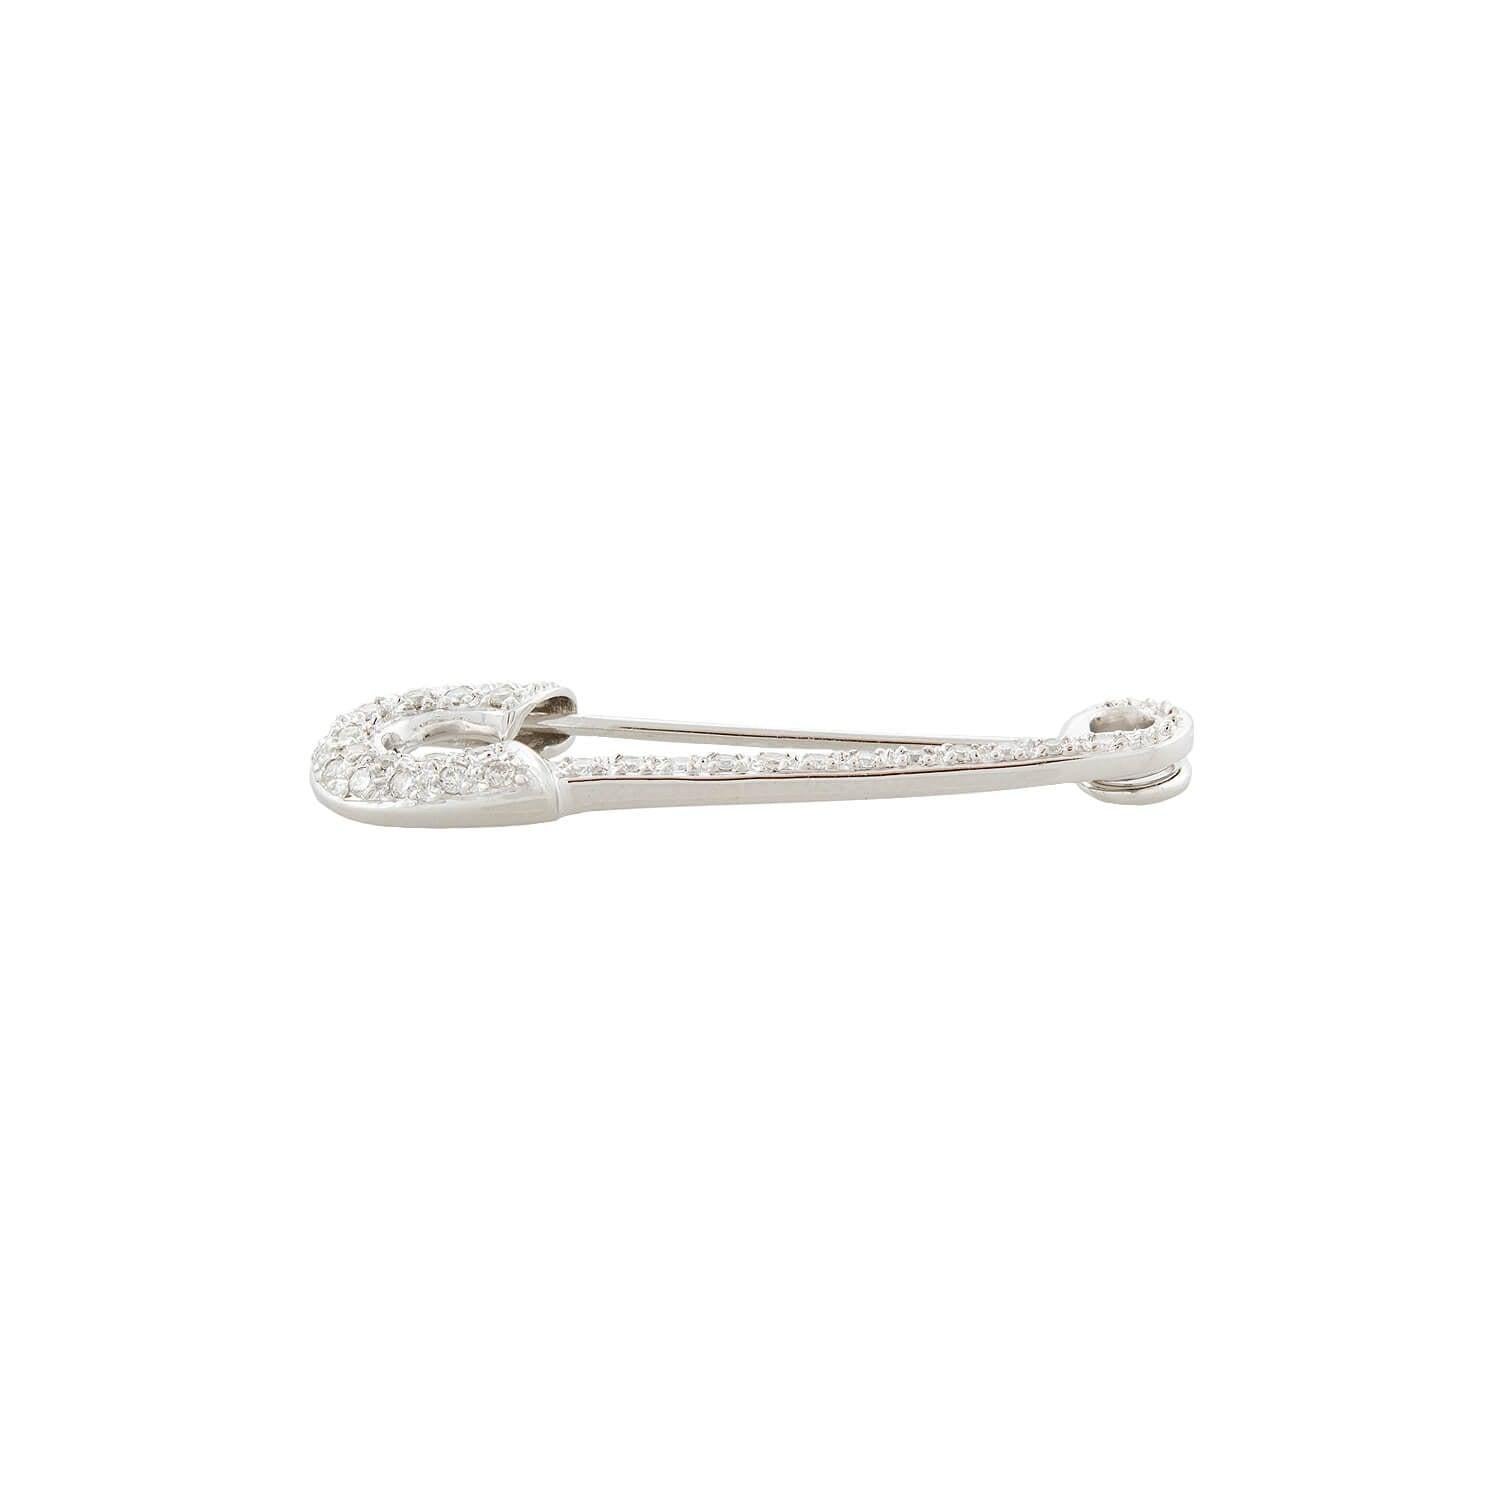 A fabulous pair of contemporary safety pins! Crafted in 14kt white gold, each safety pin is pavé set with glittering Round Cut diamonds, weighing an approximate total of 0.85ctw across the pair. Each safety pin is marked 